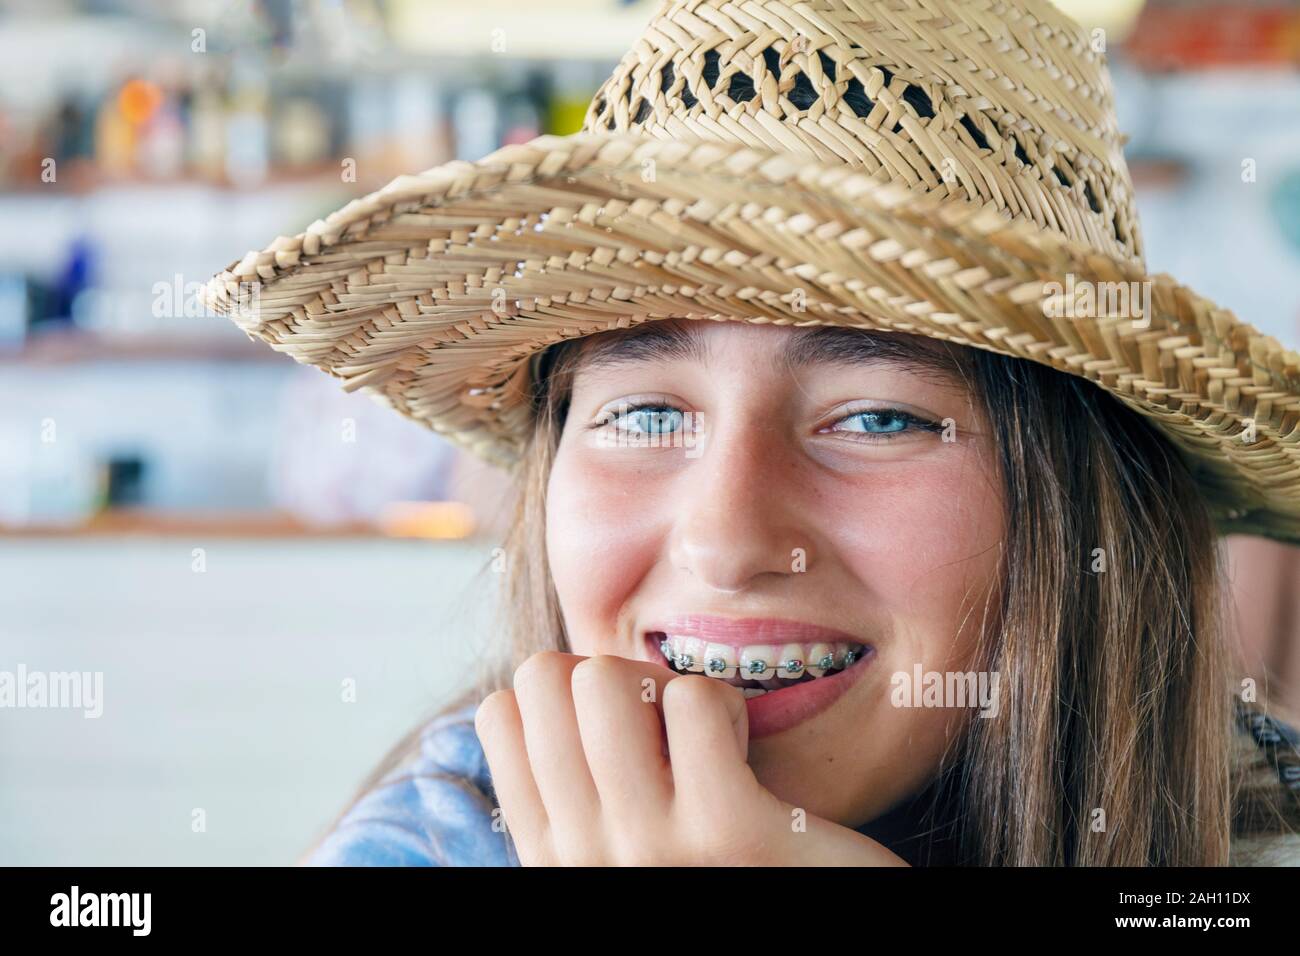 Pre-teen girl smiling directly at camera and showing her orthodontic braces. Stock Photo